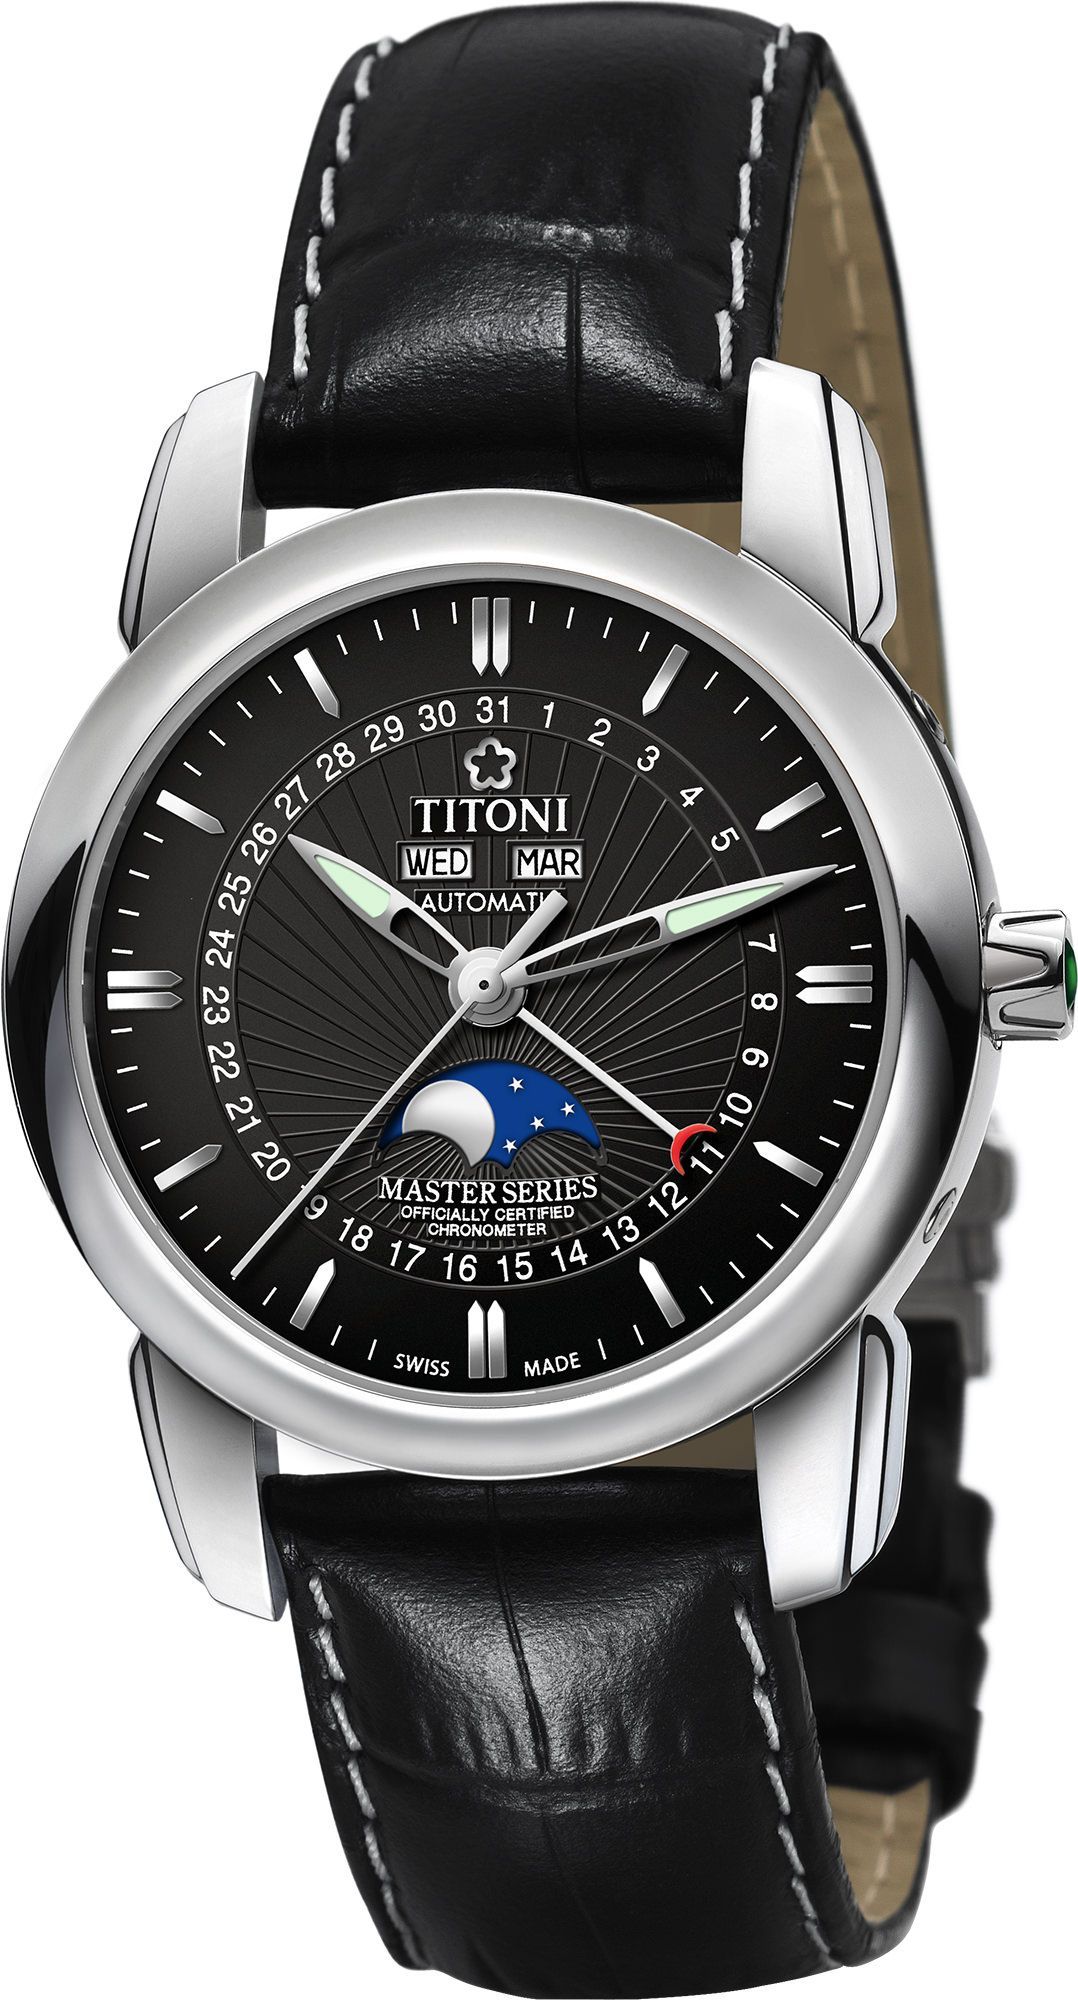 Titoni Master Series  Black Dial 40 mm Automatic Watch For Men - 1